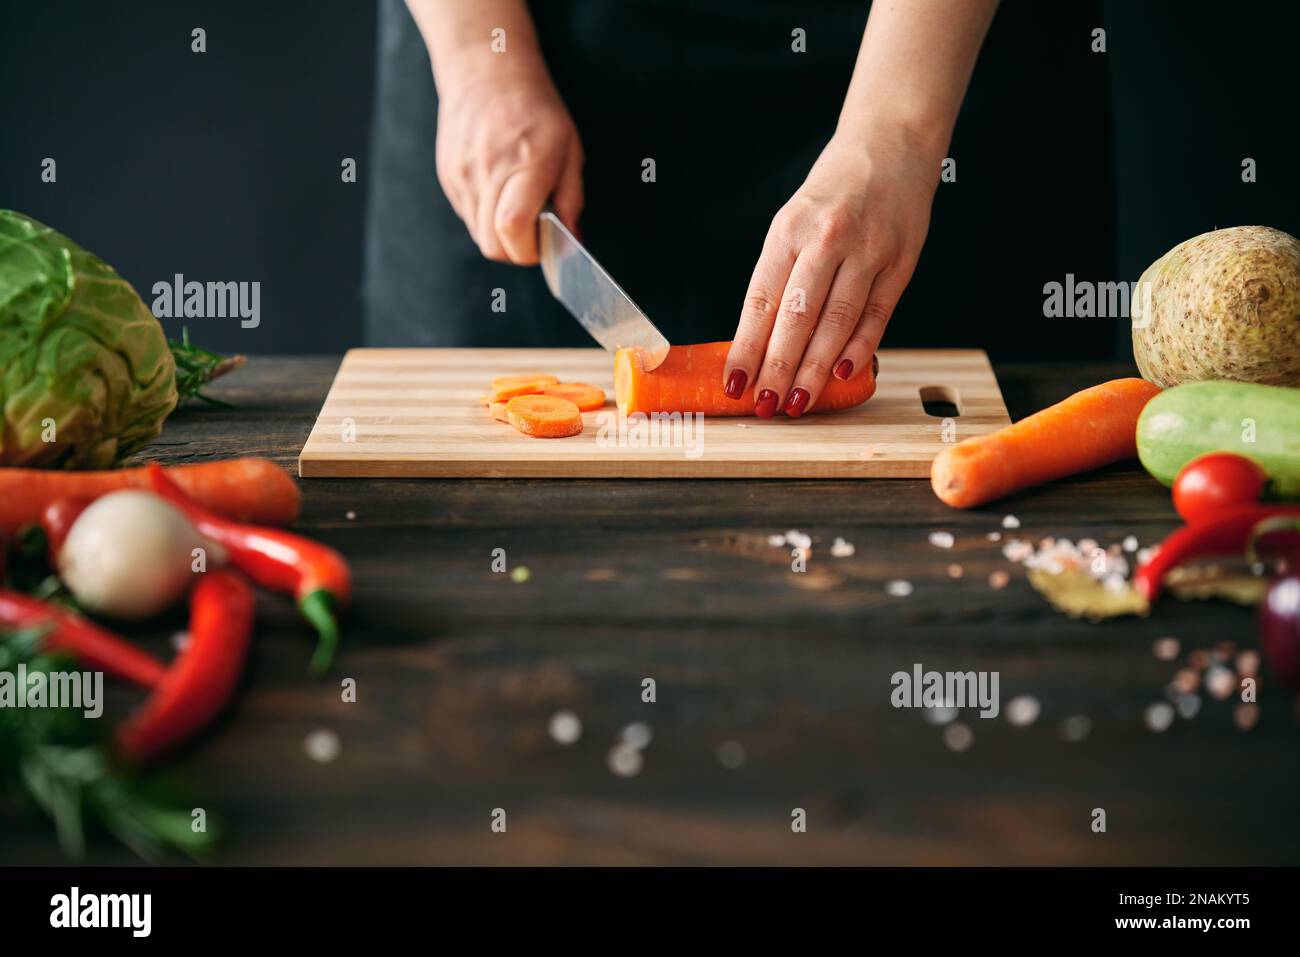 Woman cooking in kitchen at home. Closeup of female hands slicing carrots on chopping board. Culinary, healthy eating concept Stock Photo